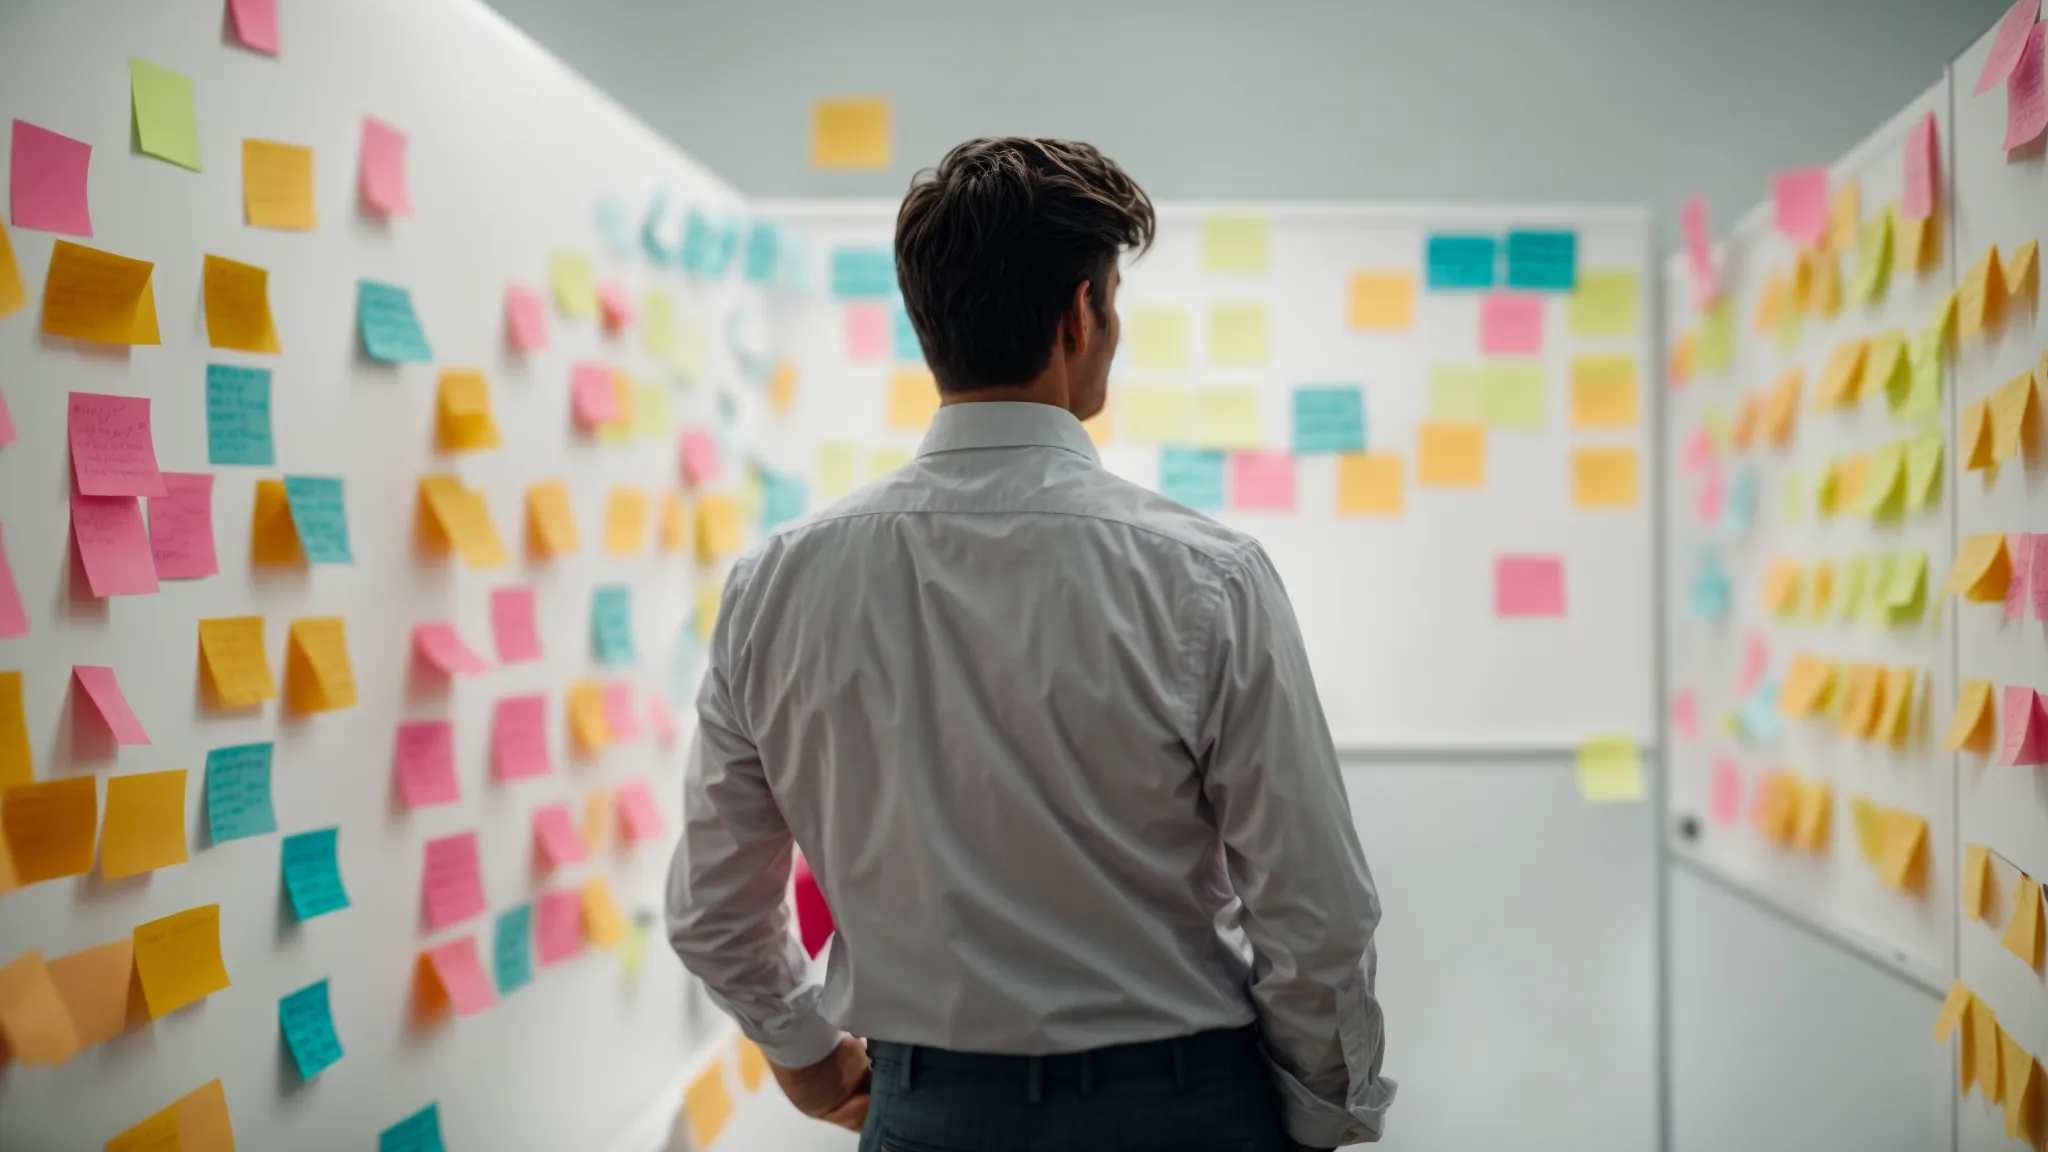 a person standing before a large whiteboard, intensely analyzing and rearranging colorful sticky notes.